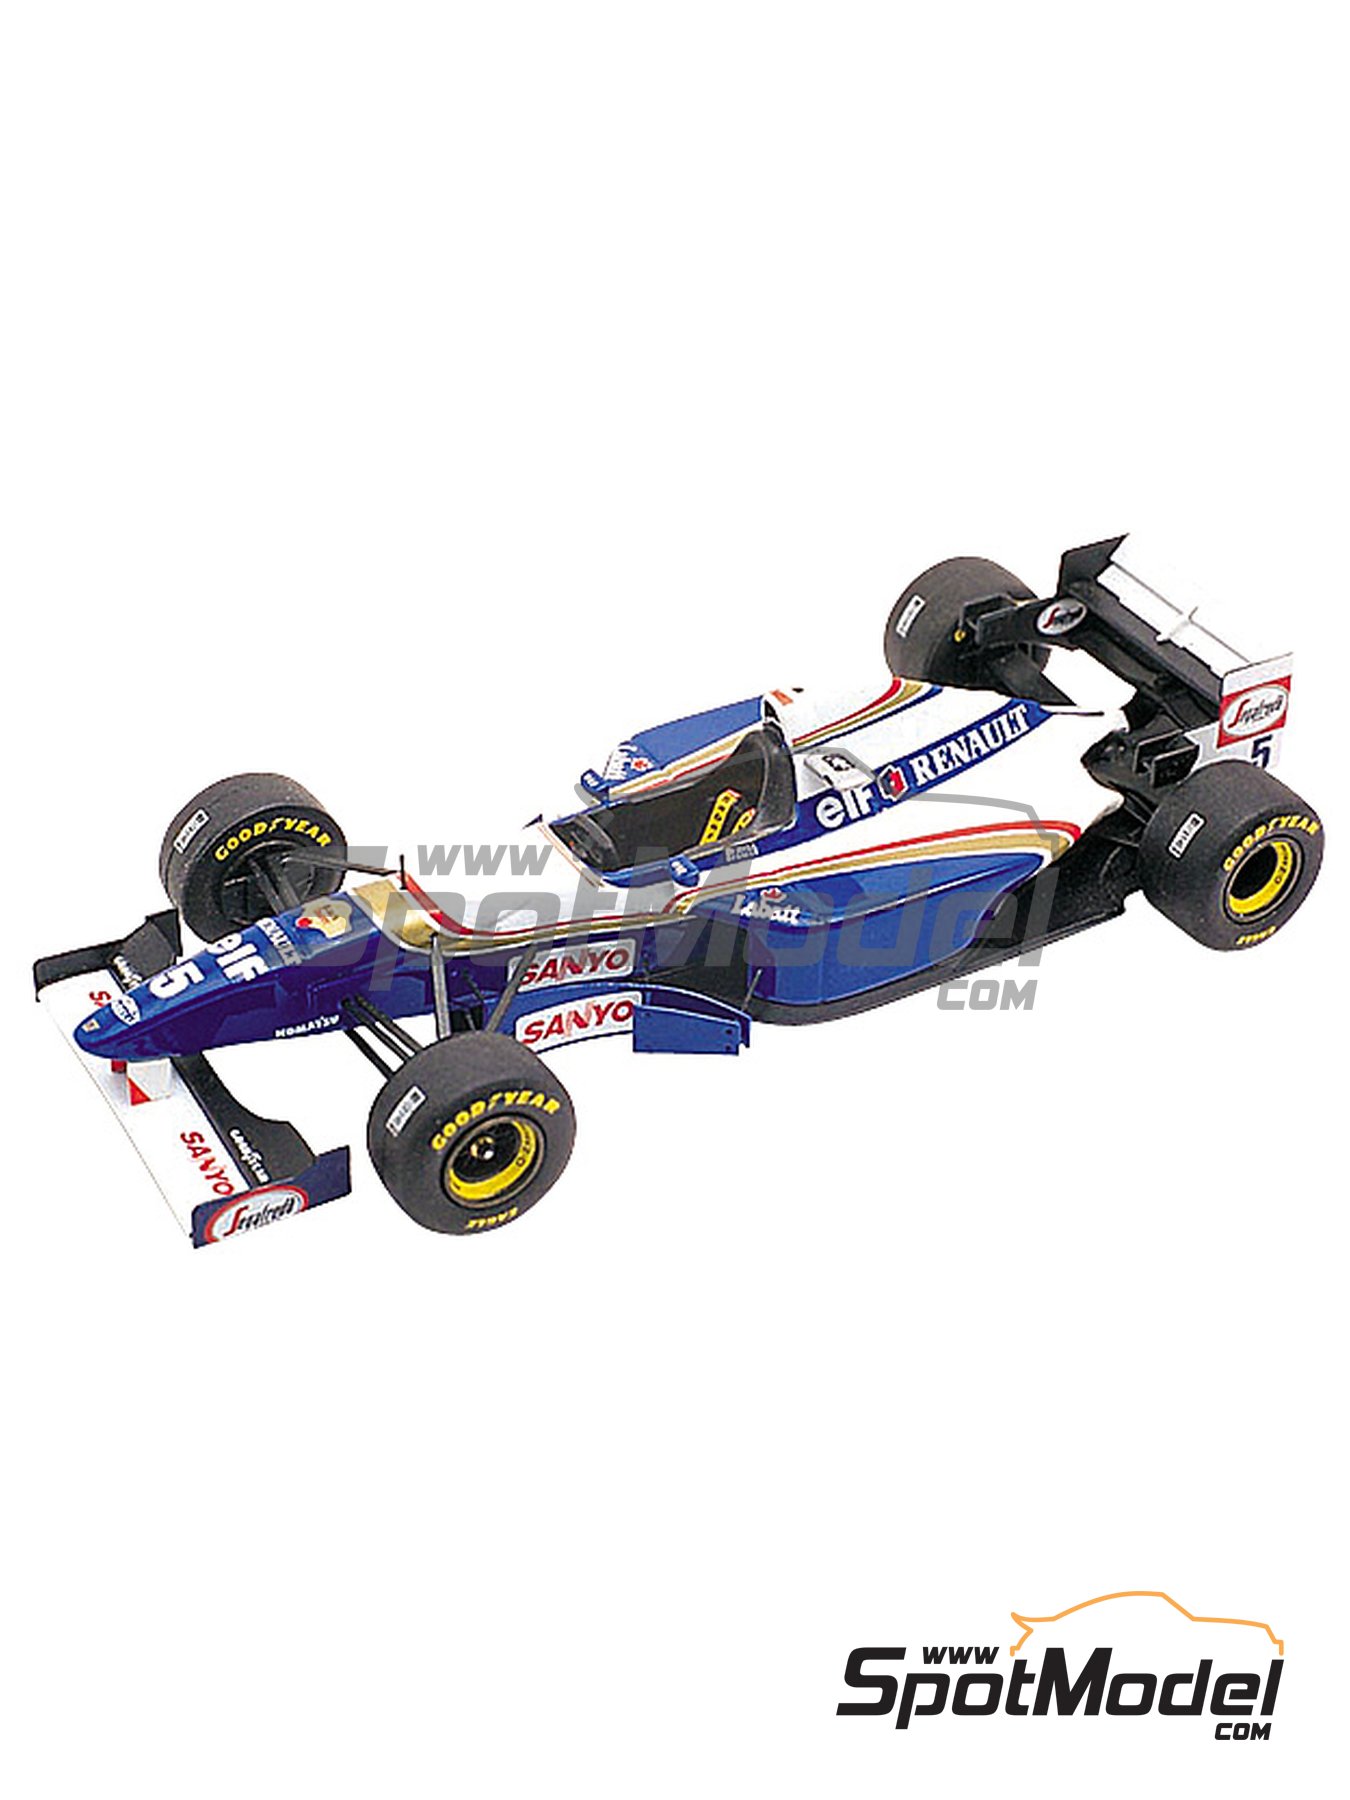 Williams Renault FW17 Williams Grand Prix Engineering Team sponsored by  Rothmans - Argentine Formula 1 Grand Prix 1995. Car scale model kit in 1/43  sc